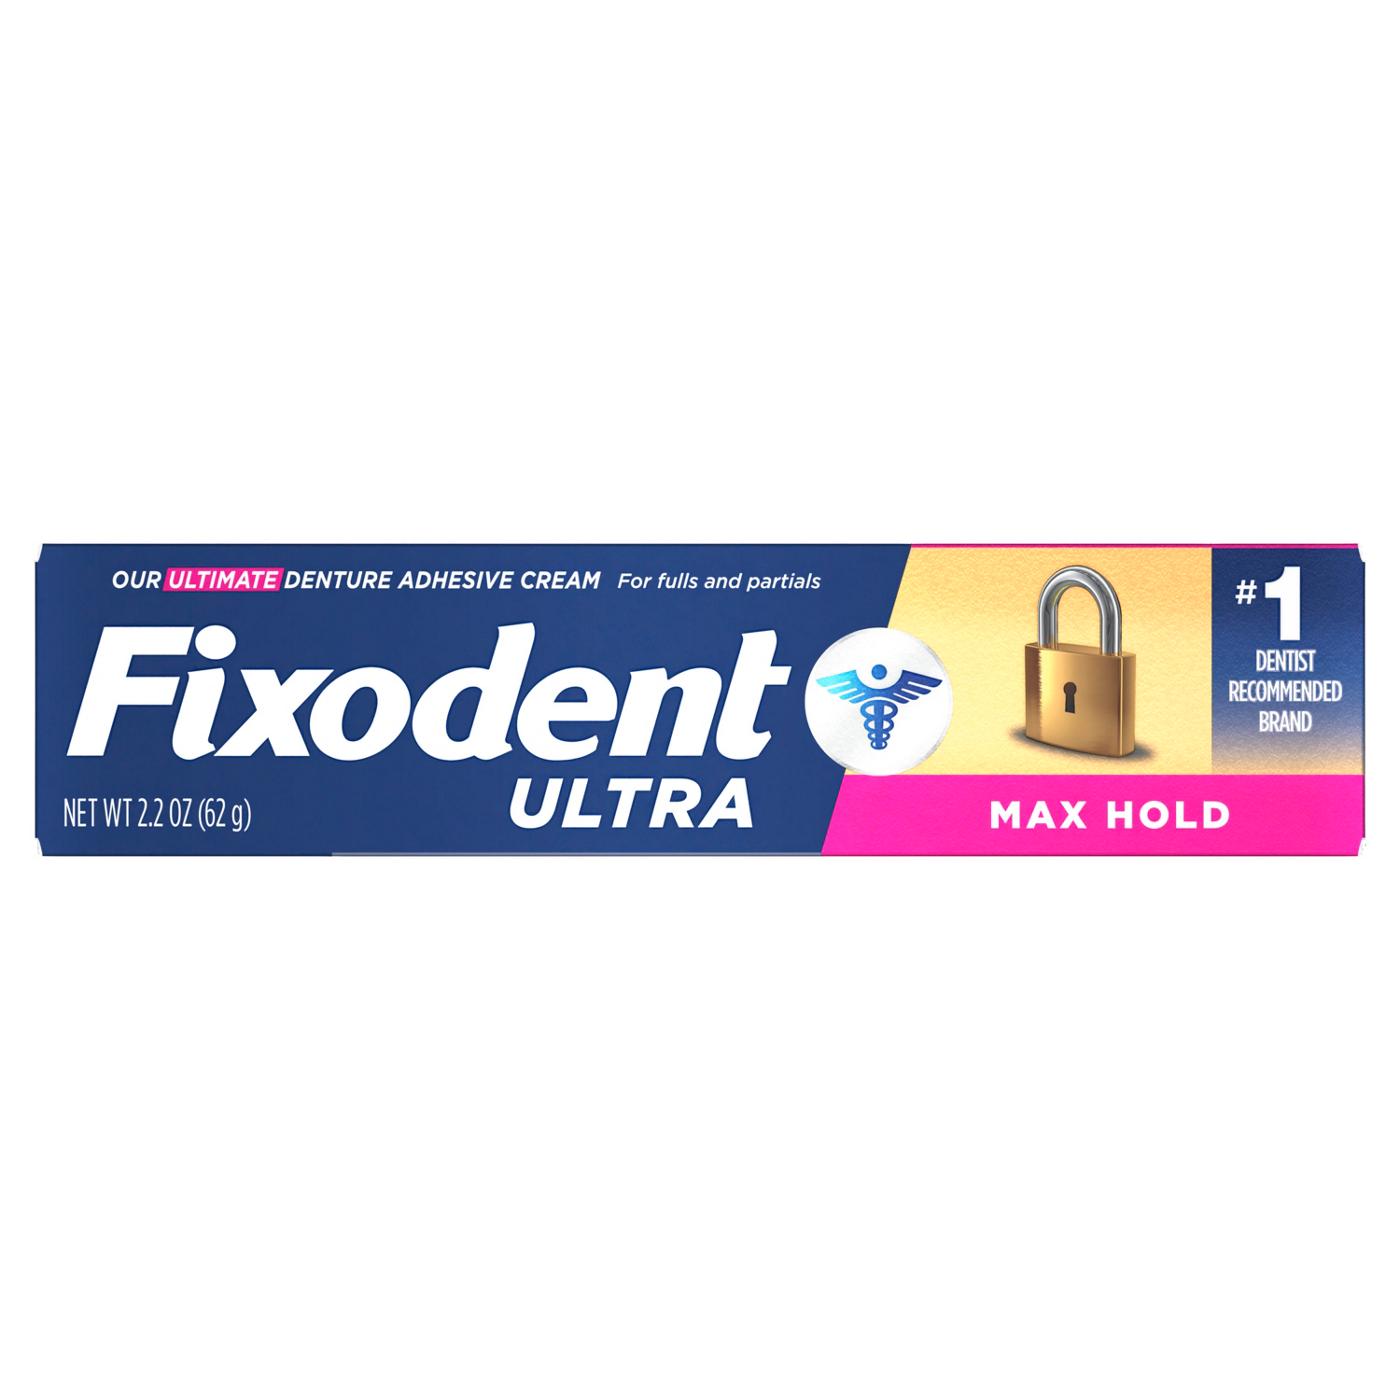 Fixodent Ultra Max Hold Denture Adhesive Cream; image 1 of 4